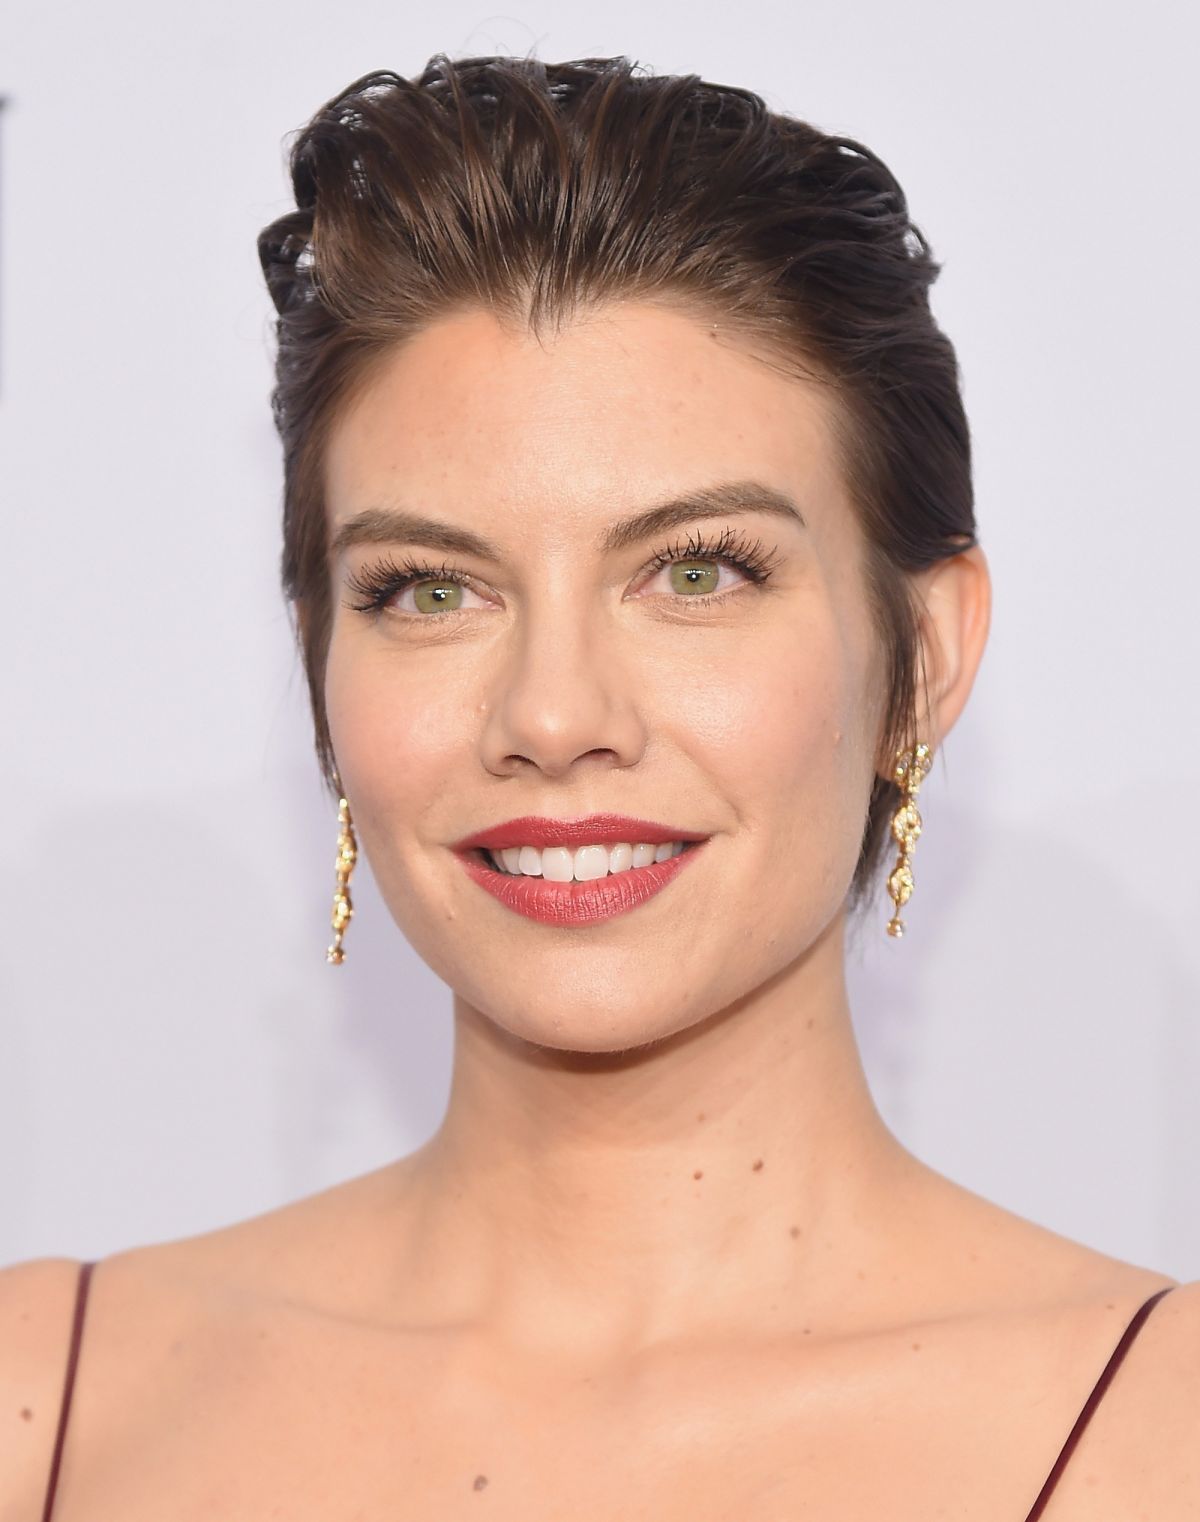 LAUREN COHAN at Whiskey Cavalier Panet at TCA Winter Tour 